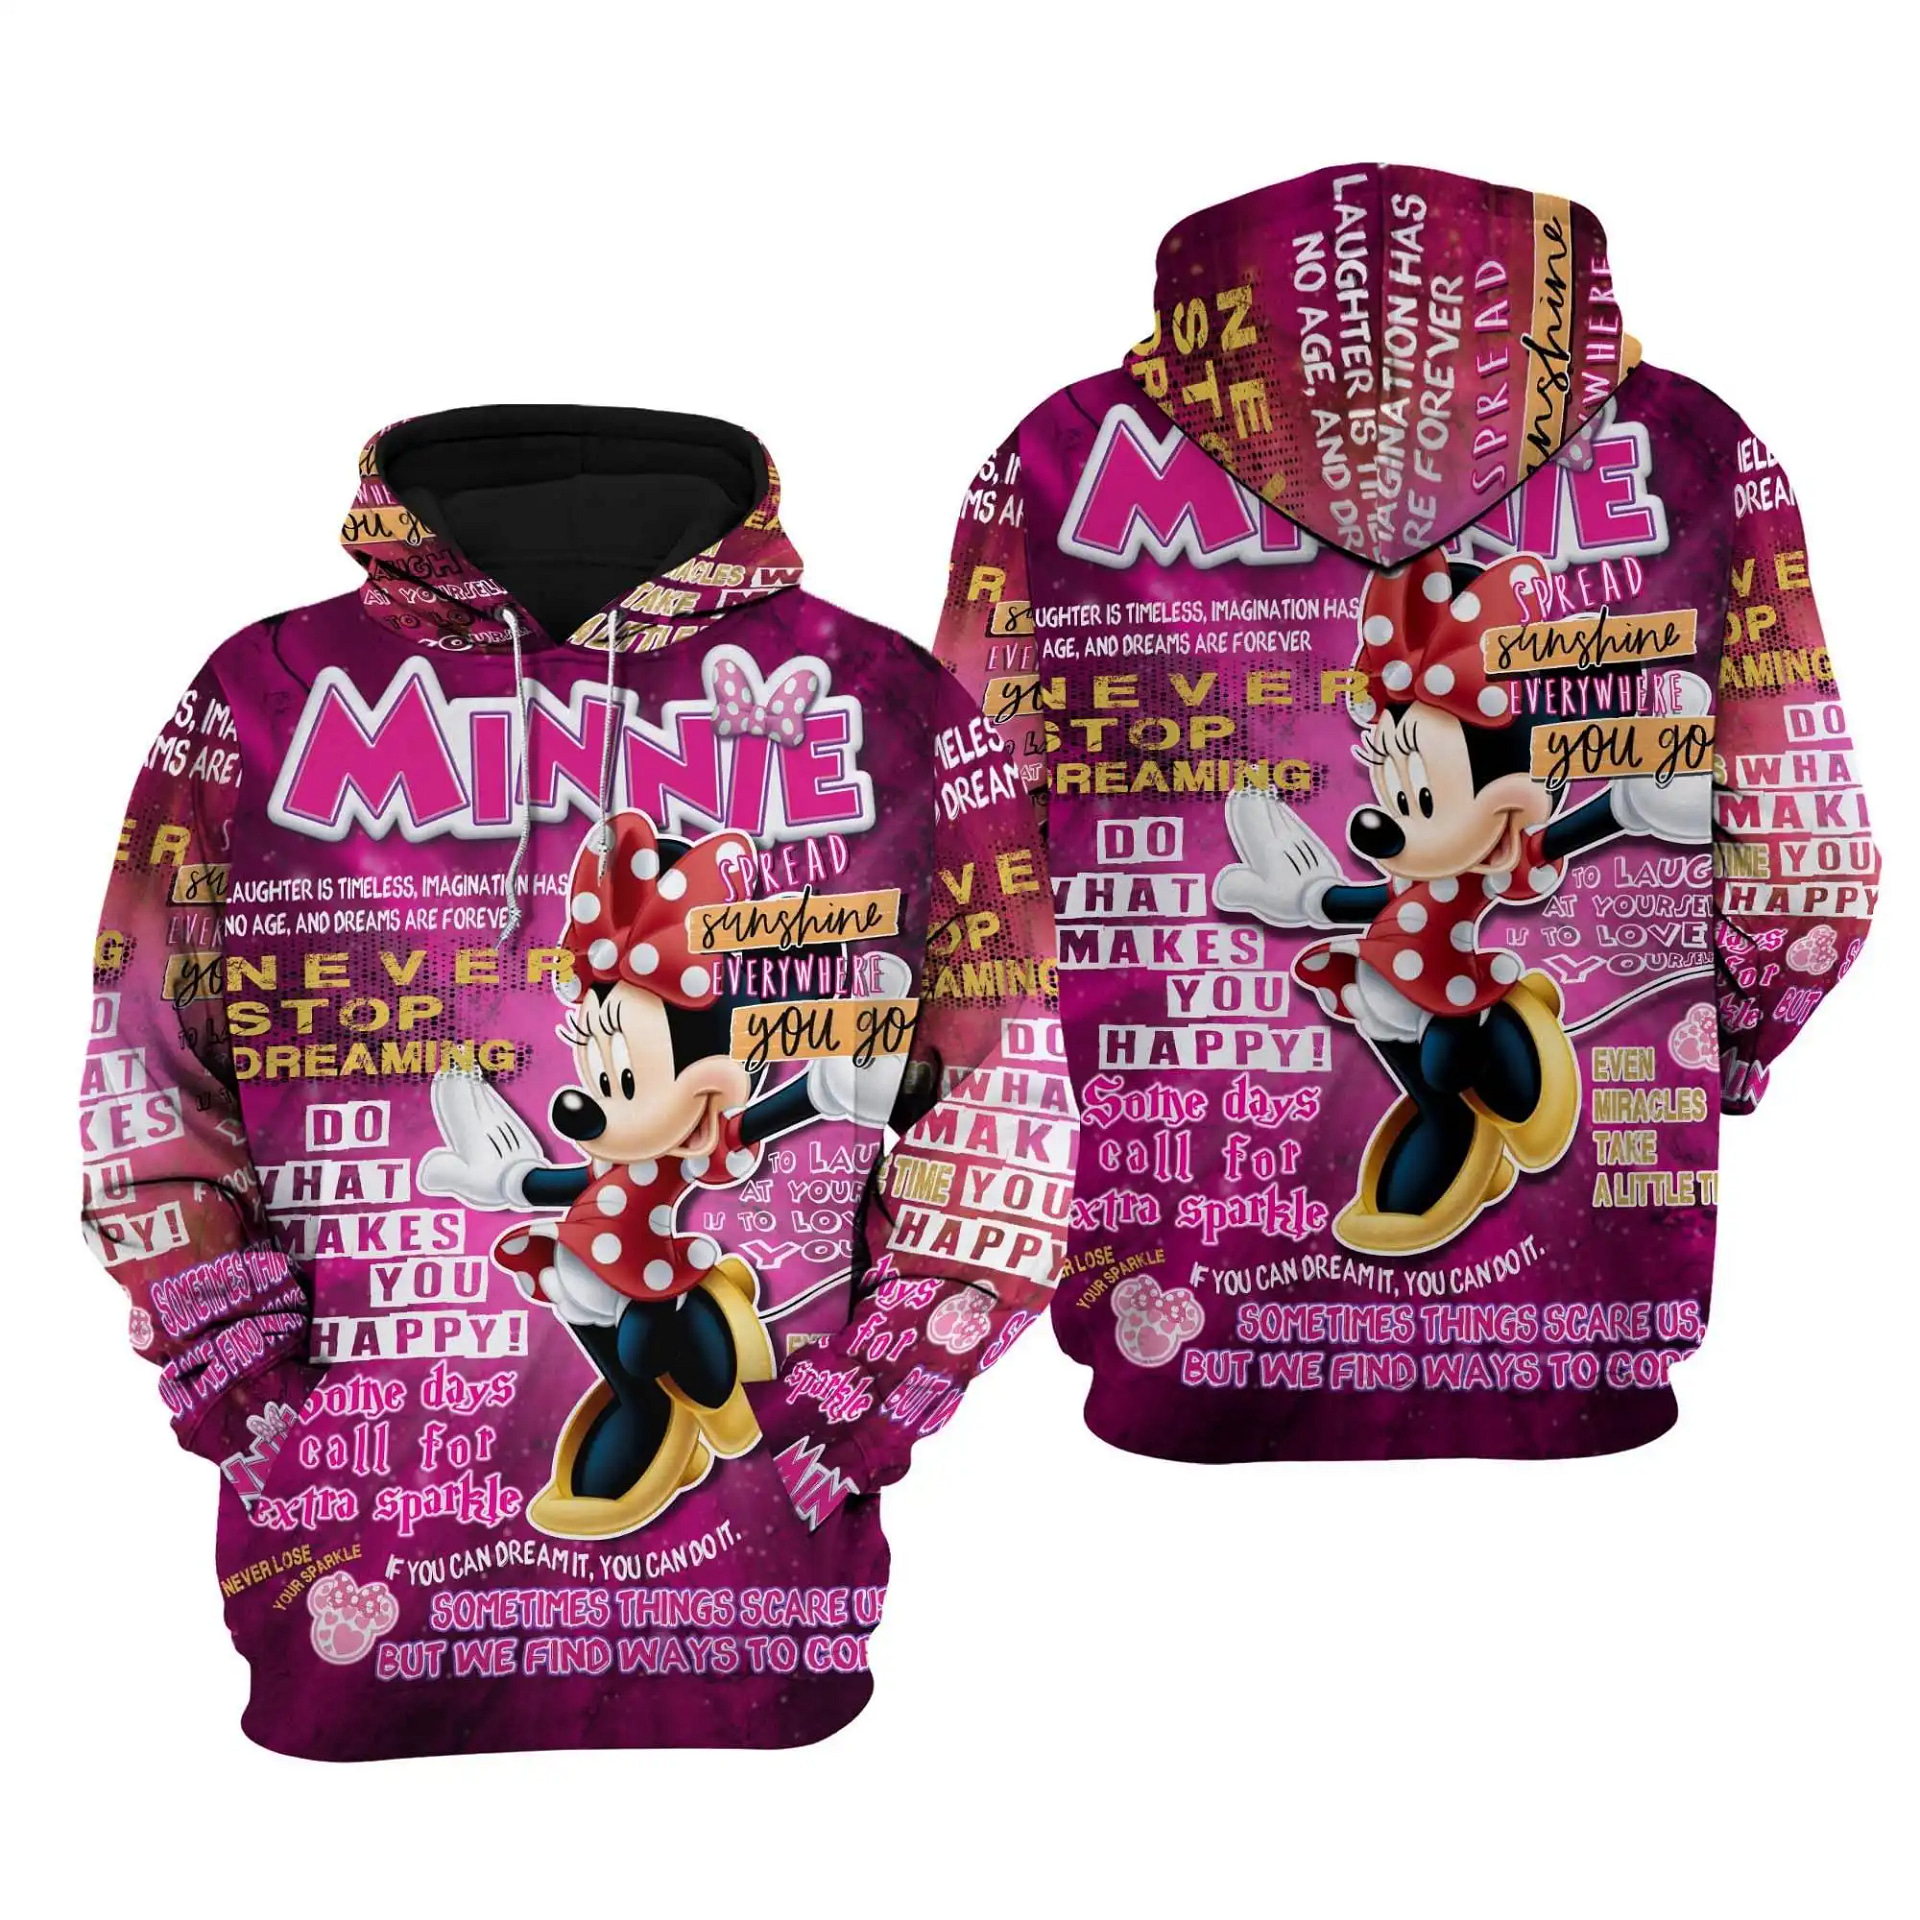 Minnie Mouse Punk Words Pattern Disney Quotes Cartoon Graphic Outfits Clothing Men Women Kids Toddlers Hoodie 3D